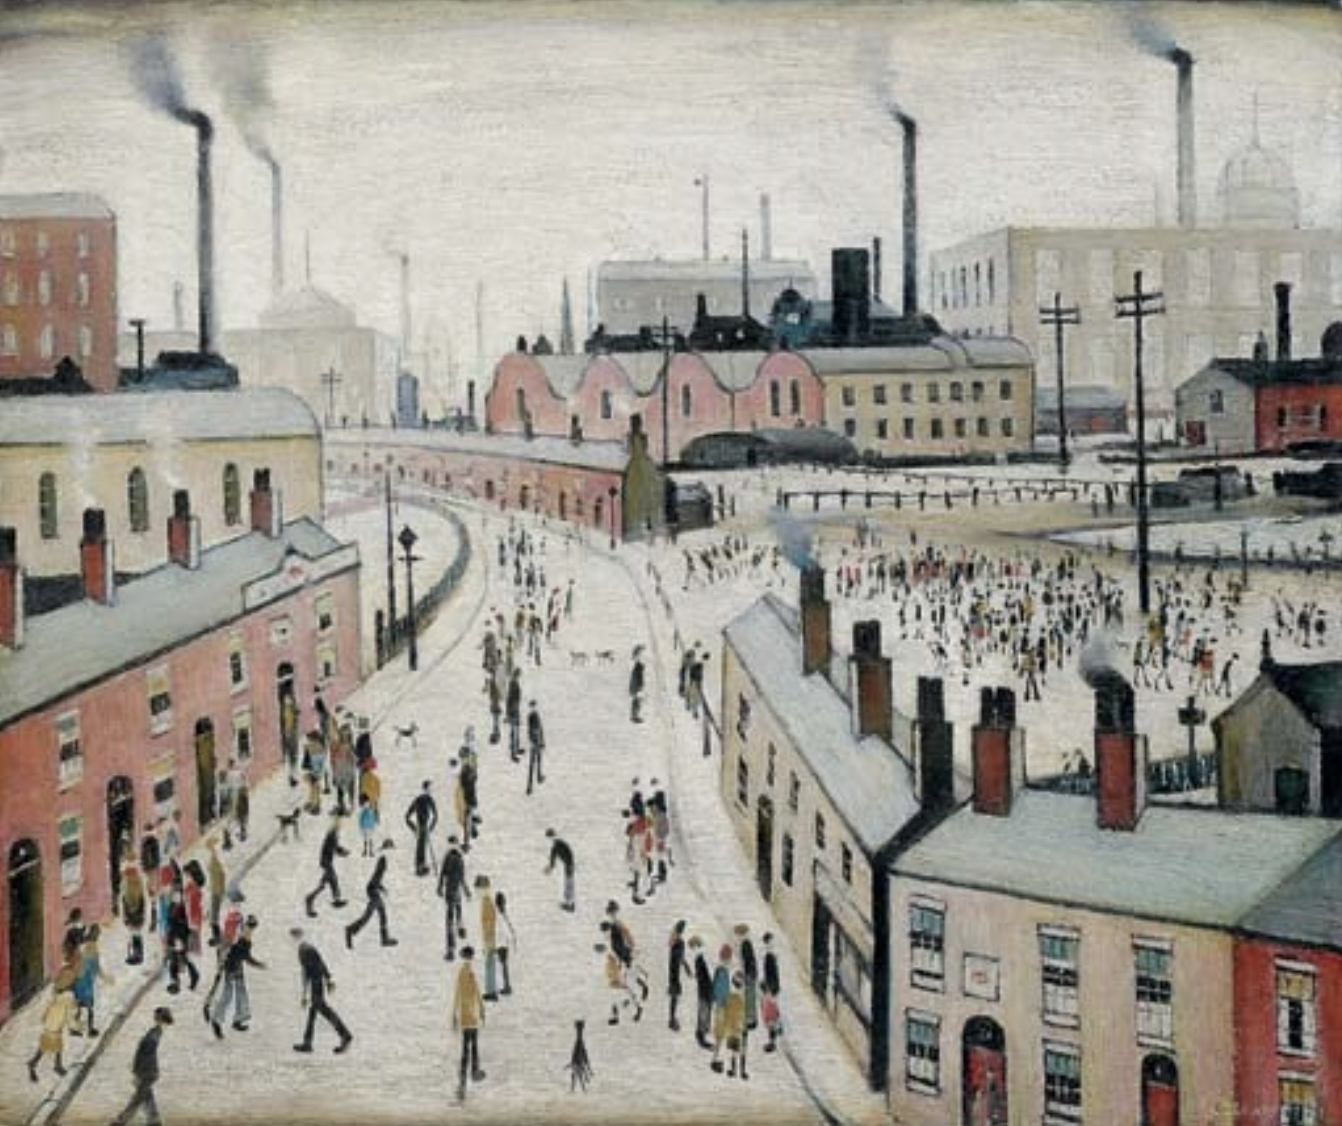 Factories, Lancashire (1947) by Laurence Stephen Lowry (1887 - 1976), English artist.